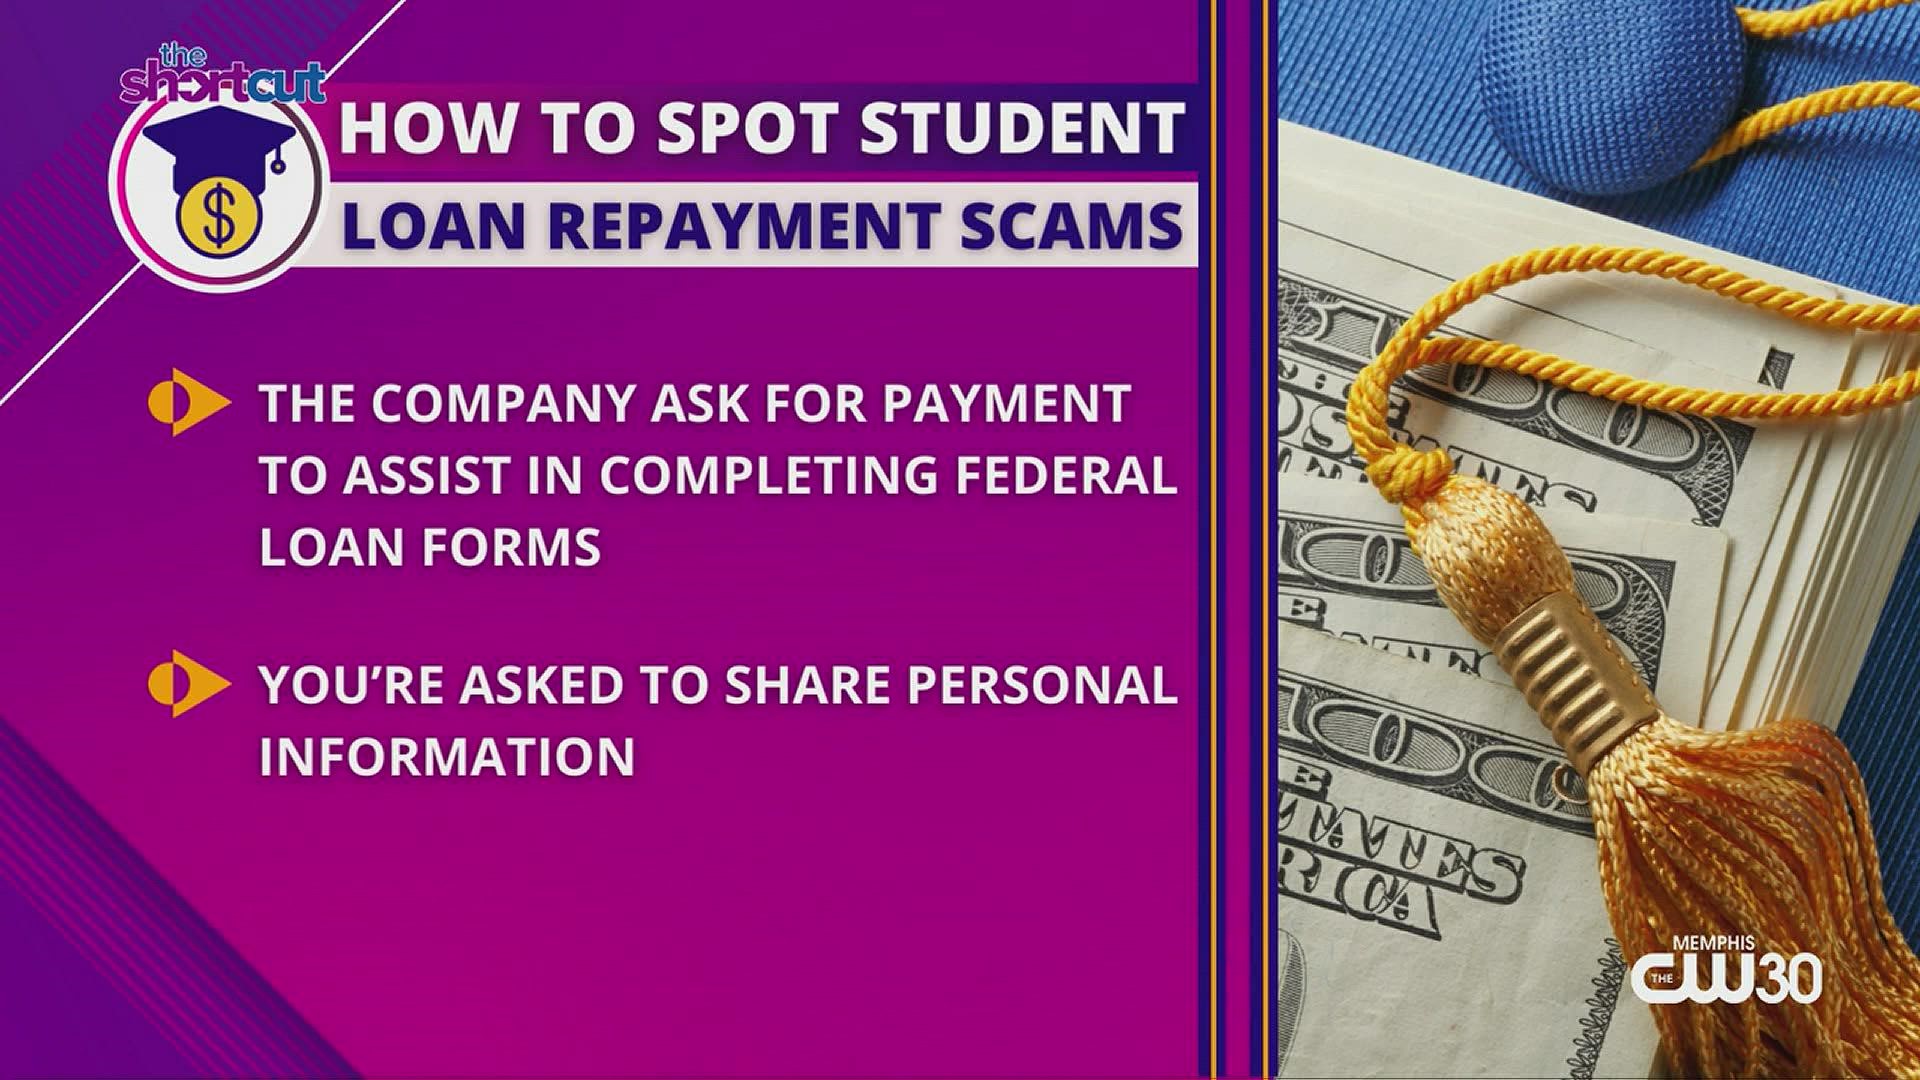 Don't fall victim to student loan scams! Learn how to avoid them with student loan debt scam expert Mary Jo Terry right here on "The Shortcut!"